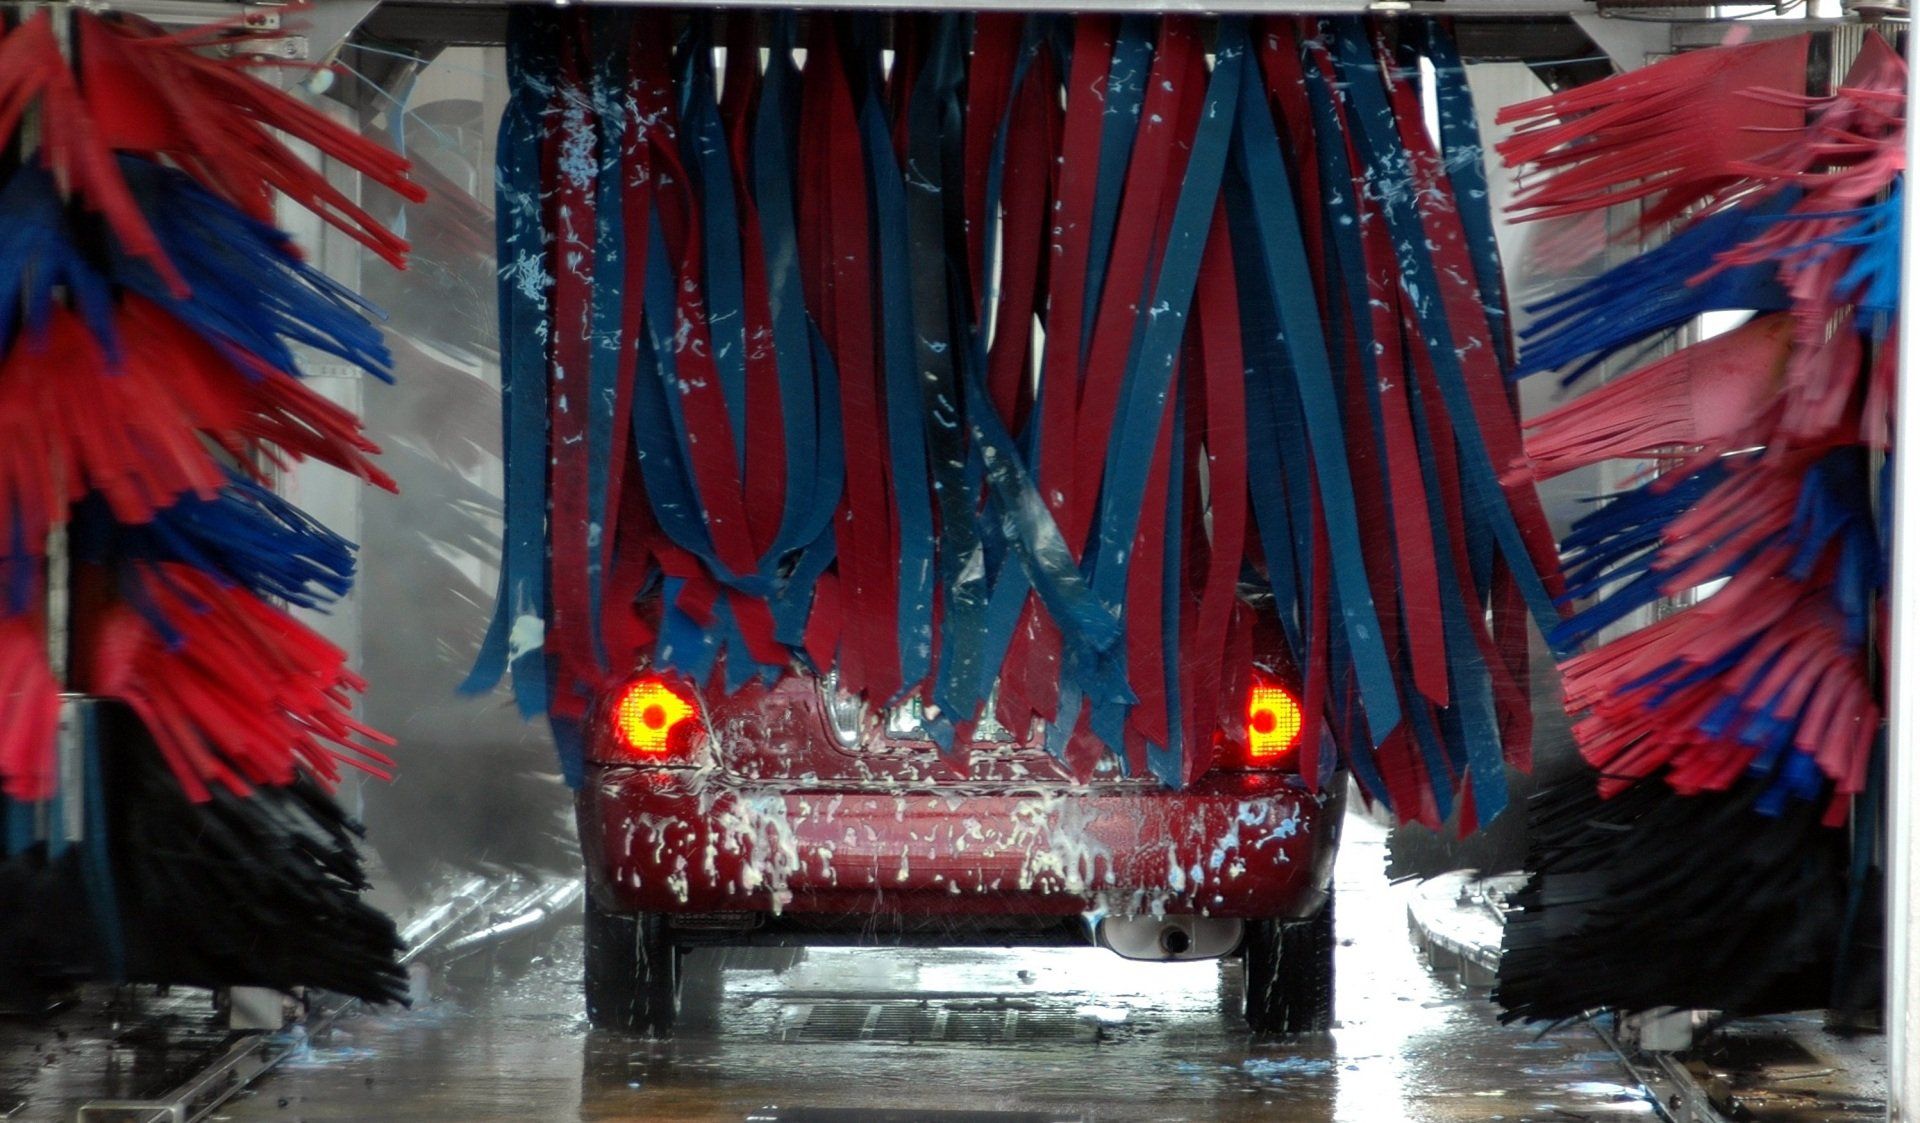 Car being washed in an automatic car wash, water jets in action.